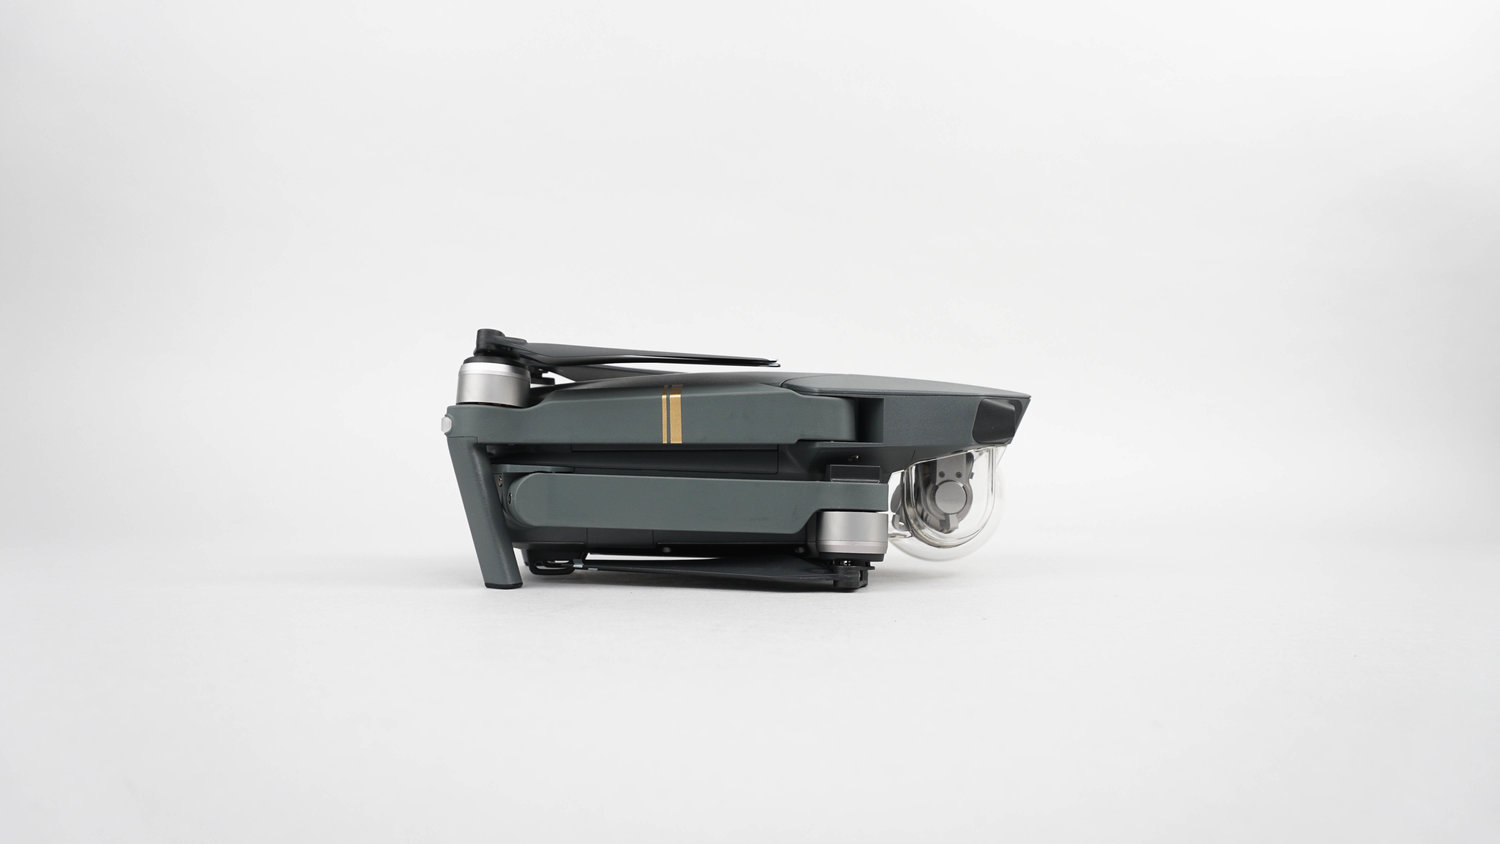 The Mavic can be folded down to fit in the palm of your hand 